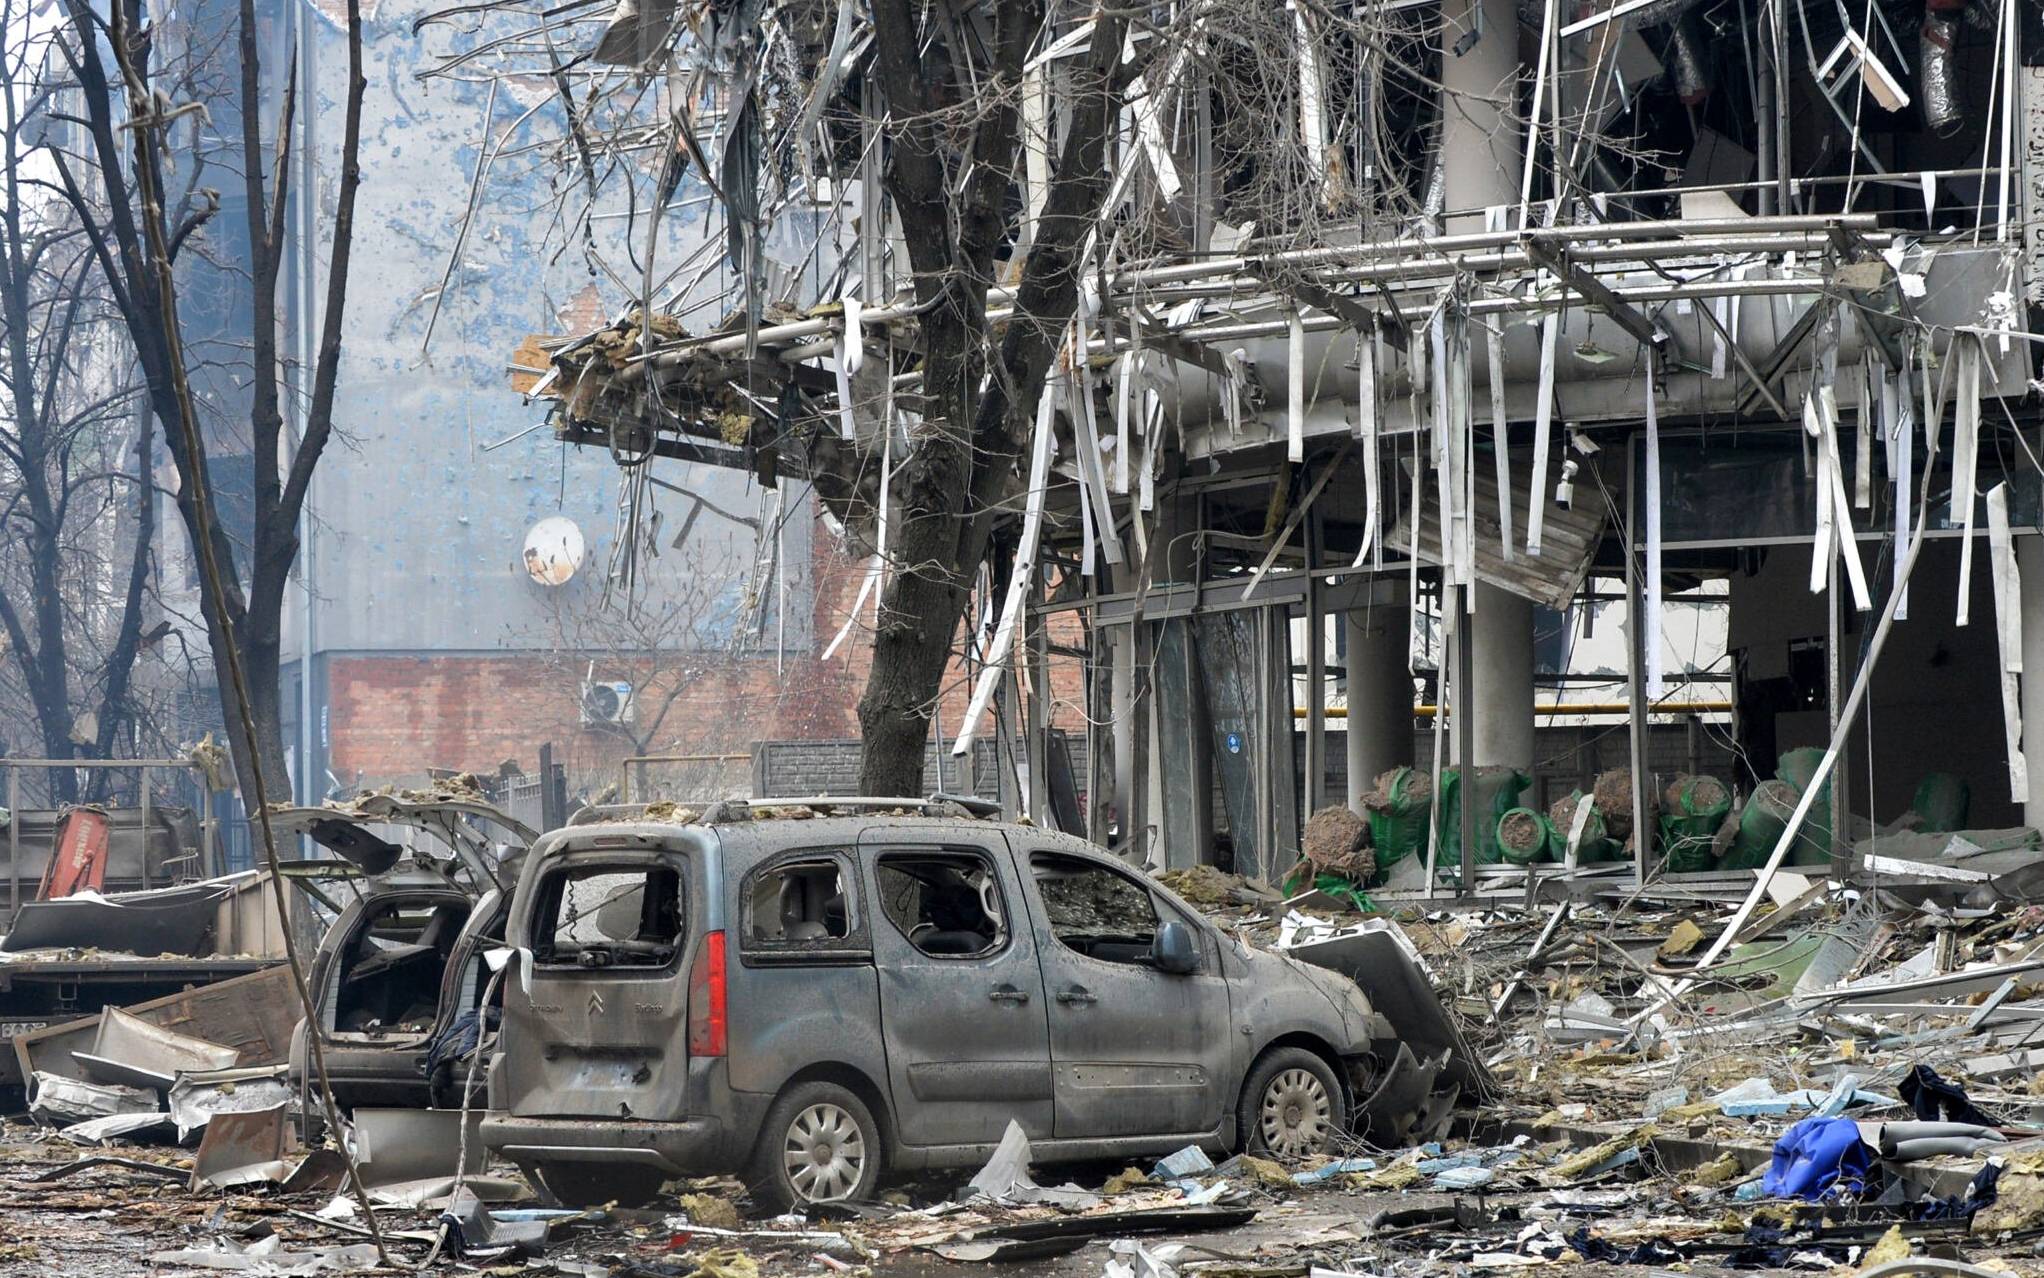 A view of damaged building after the shelling is said by Russian forces in Ukraine's second-biggest city of Kharkiv on March 3, 2022. - Ukraine and Russia agreed to create humanitarian corridors to evacuate civilians on March 3, in a second round of talks since Moscow invaded last week, negotiators on both sides said. (Photo by Sergey BOBOK / AFP)